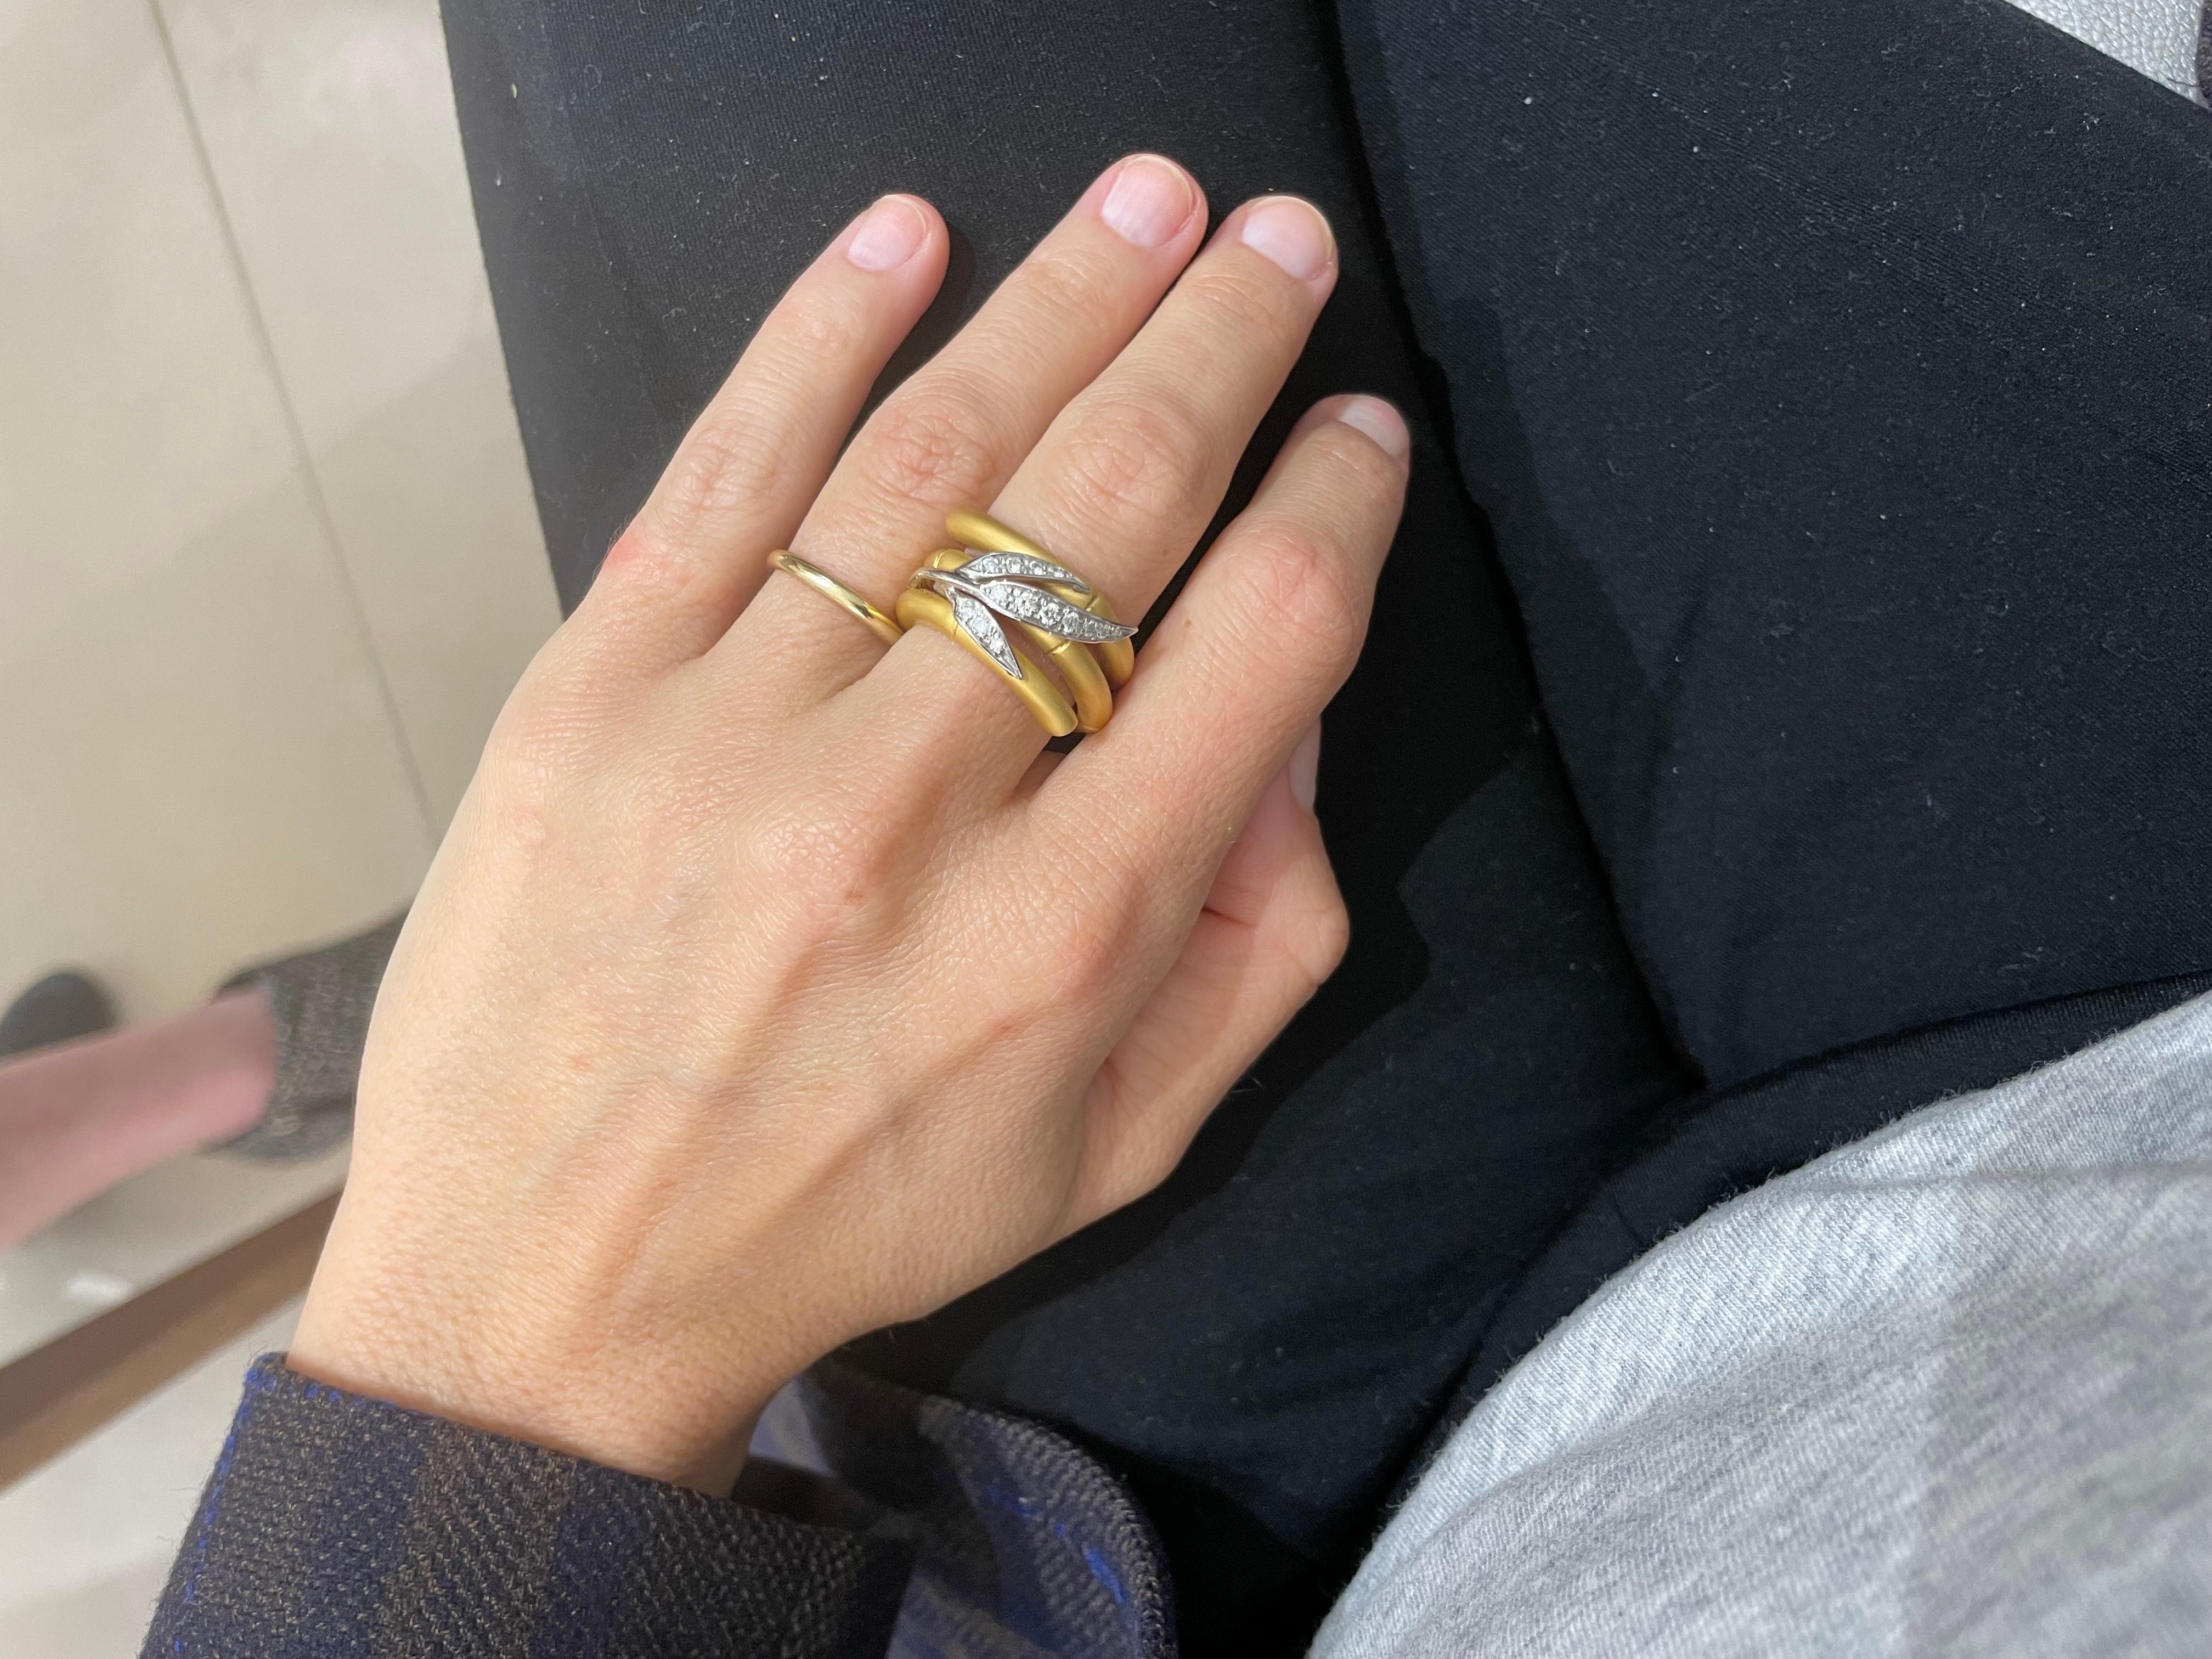 Carrera Y Carrera has built its its famous name on figurative designs, an obsession with surface finishes, and a compelling way of seeing beauty in art and nature.
This ring is designed in an 18 karat yellow gold sandblasted finish. Three 18 karat